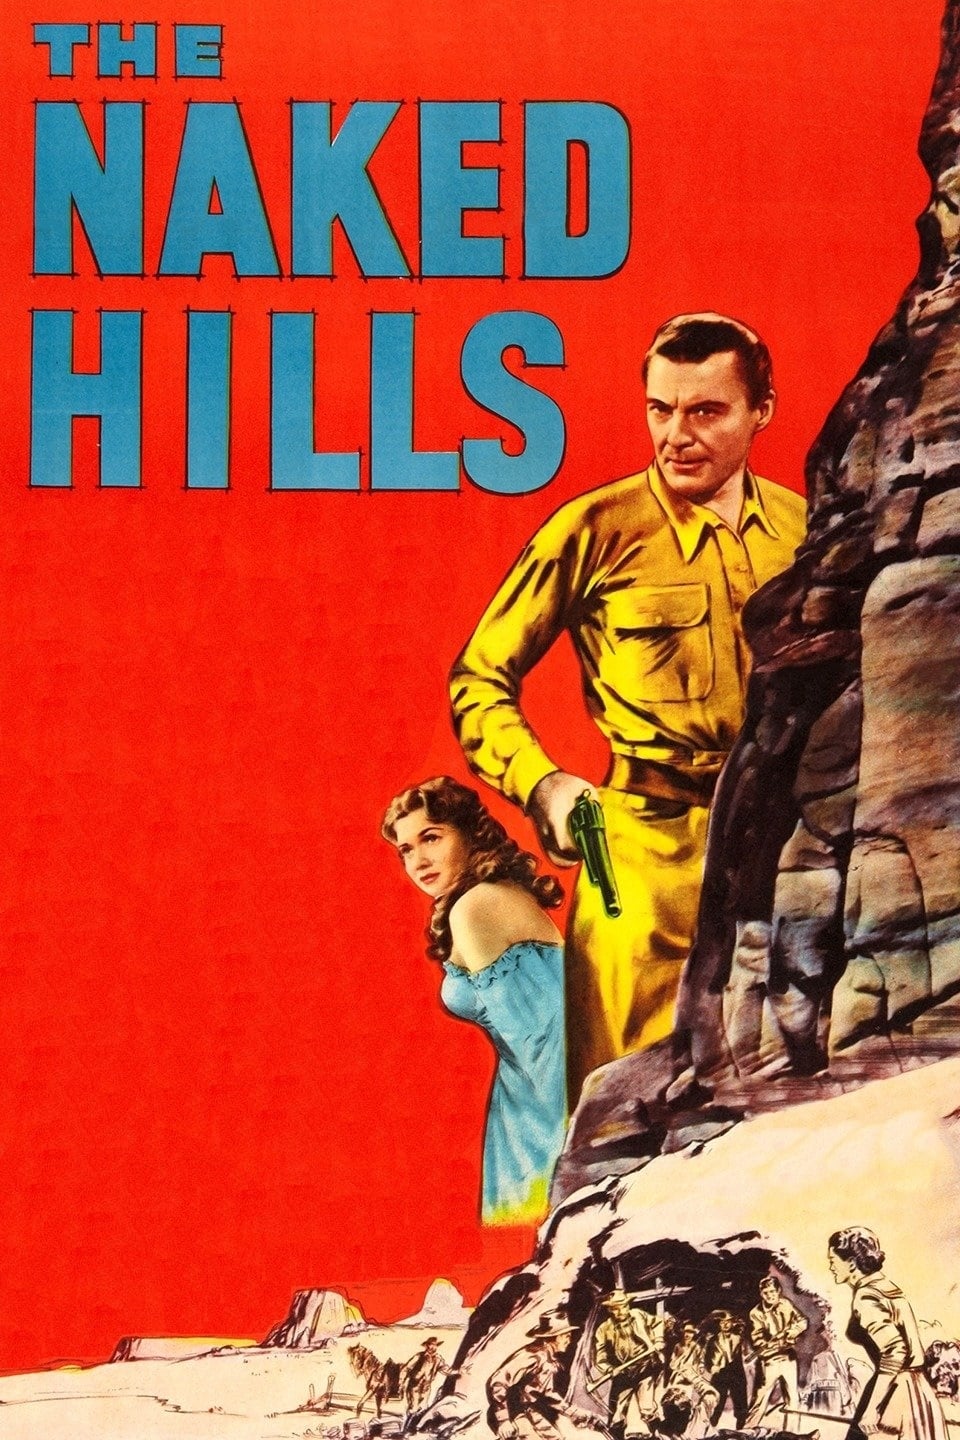 The Naked Hills (1956)